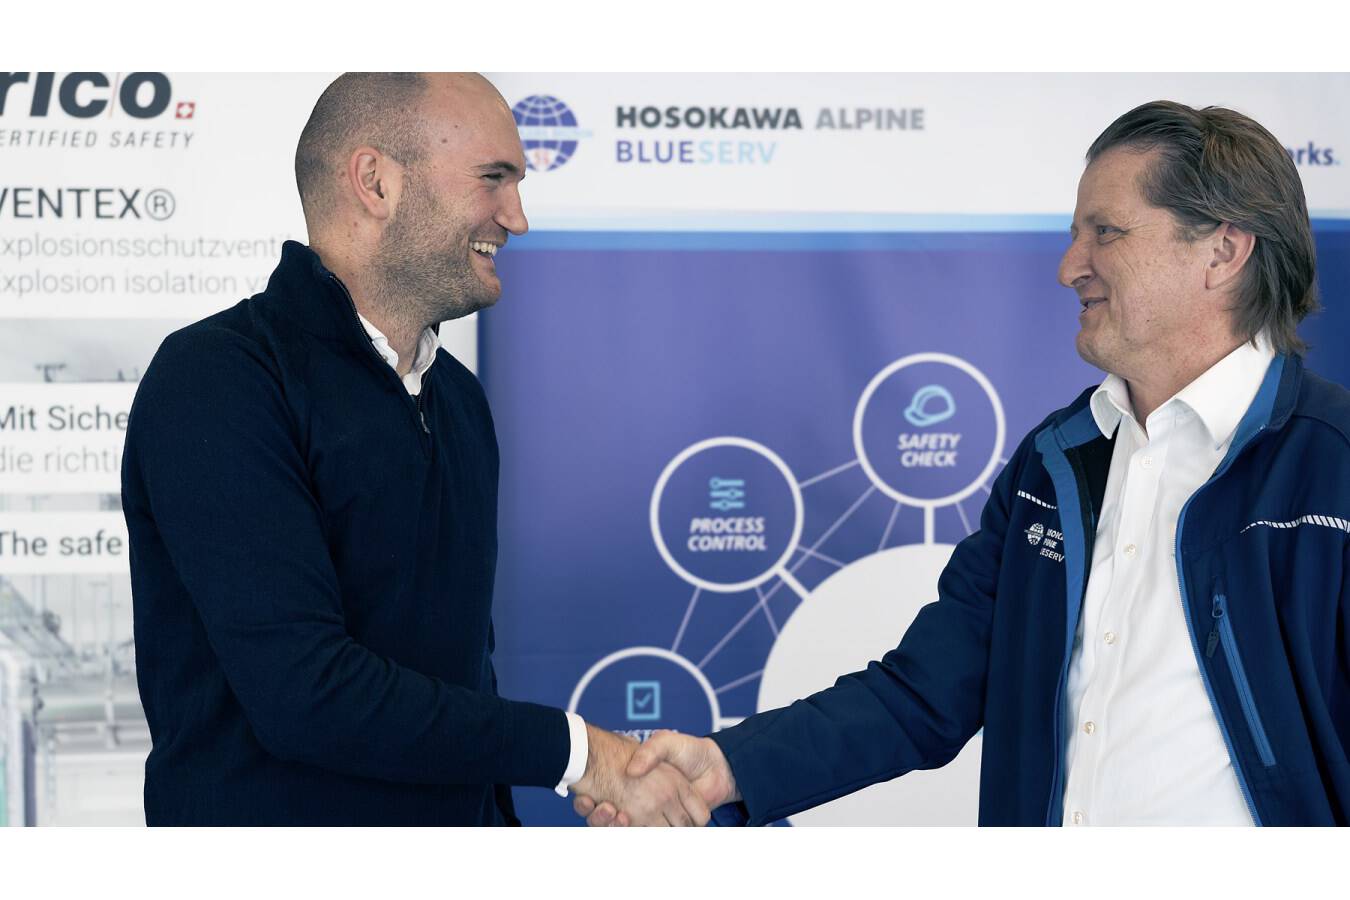 Samir Kryeziu, Head of Business Development at Rico Sicherheitstechnik, (left) and Alexander Auer, Operations Director at Blueserv, are delighted about the service co-operation.